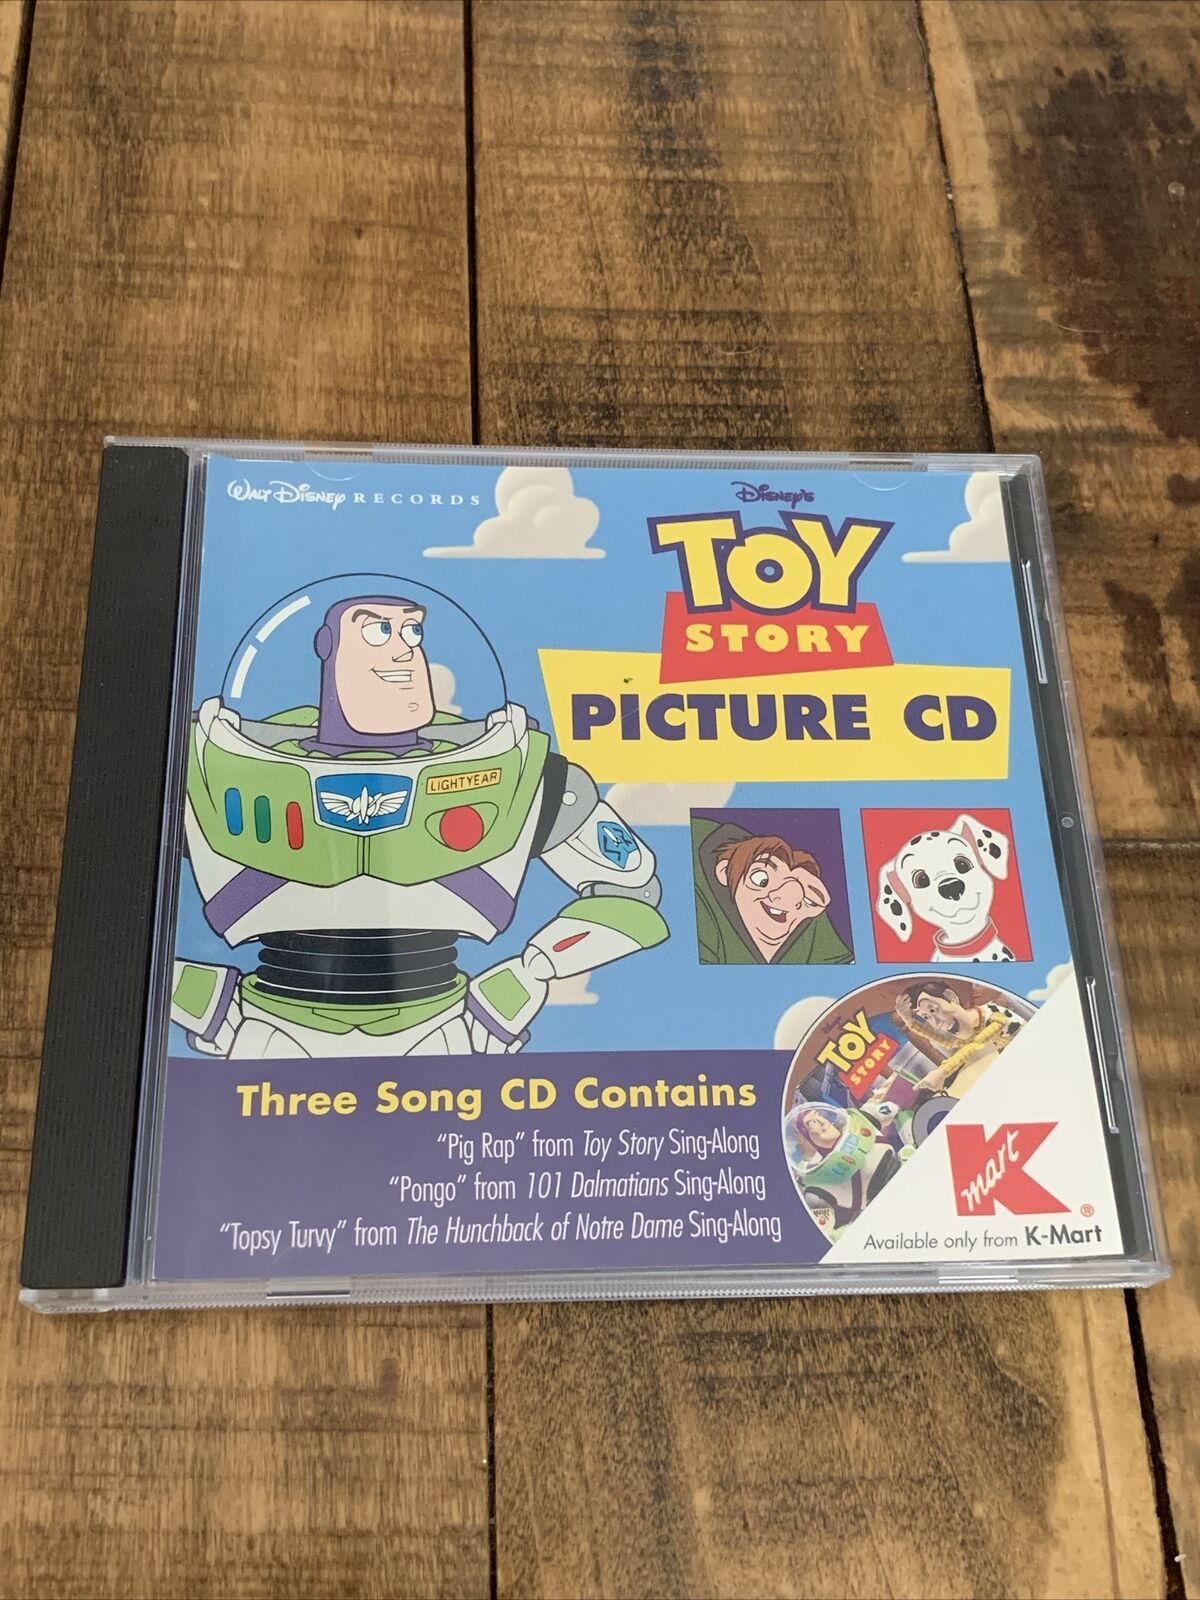 Toy Story Picture CD - Music CD - Walt Disney Records - Very Good - Audio 1996